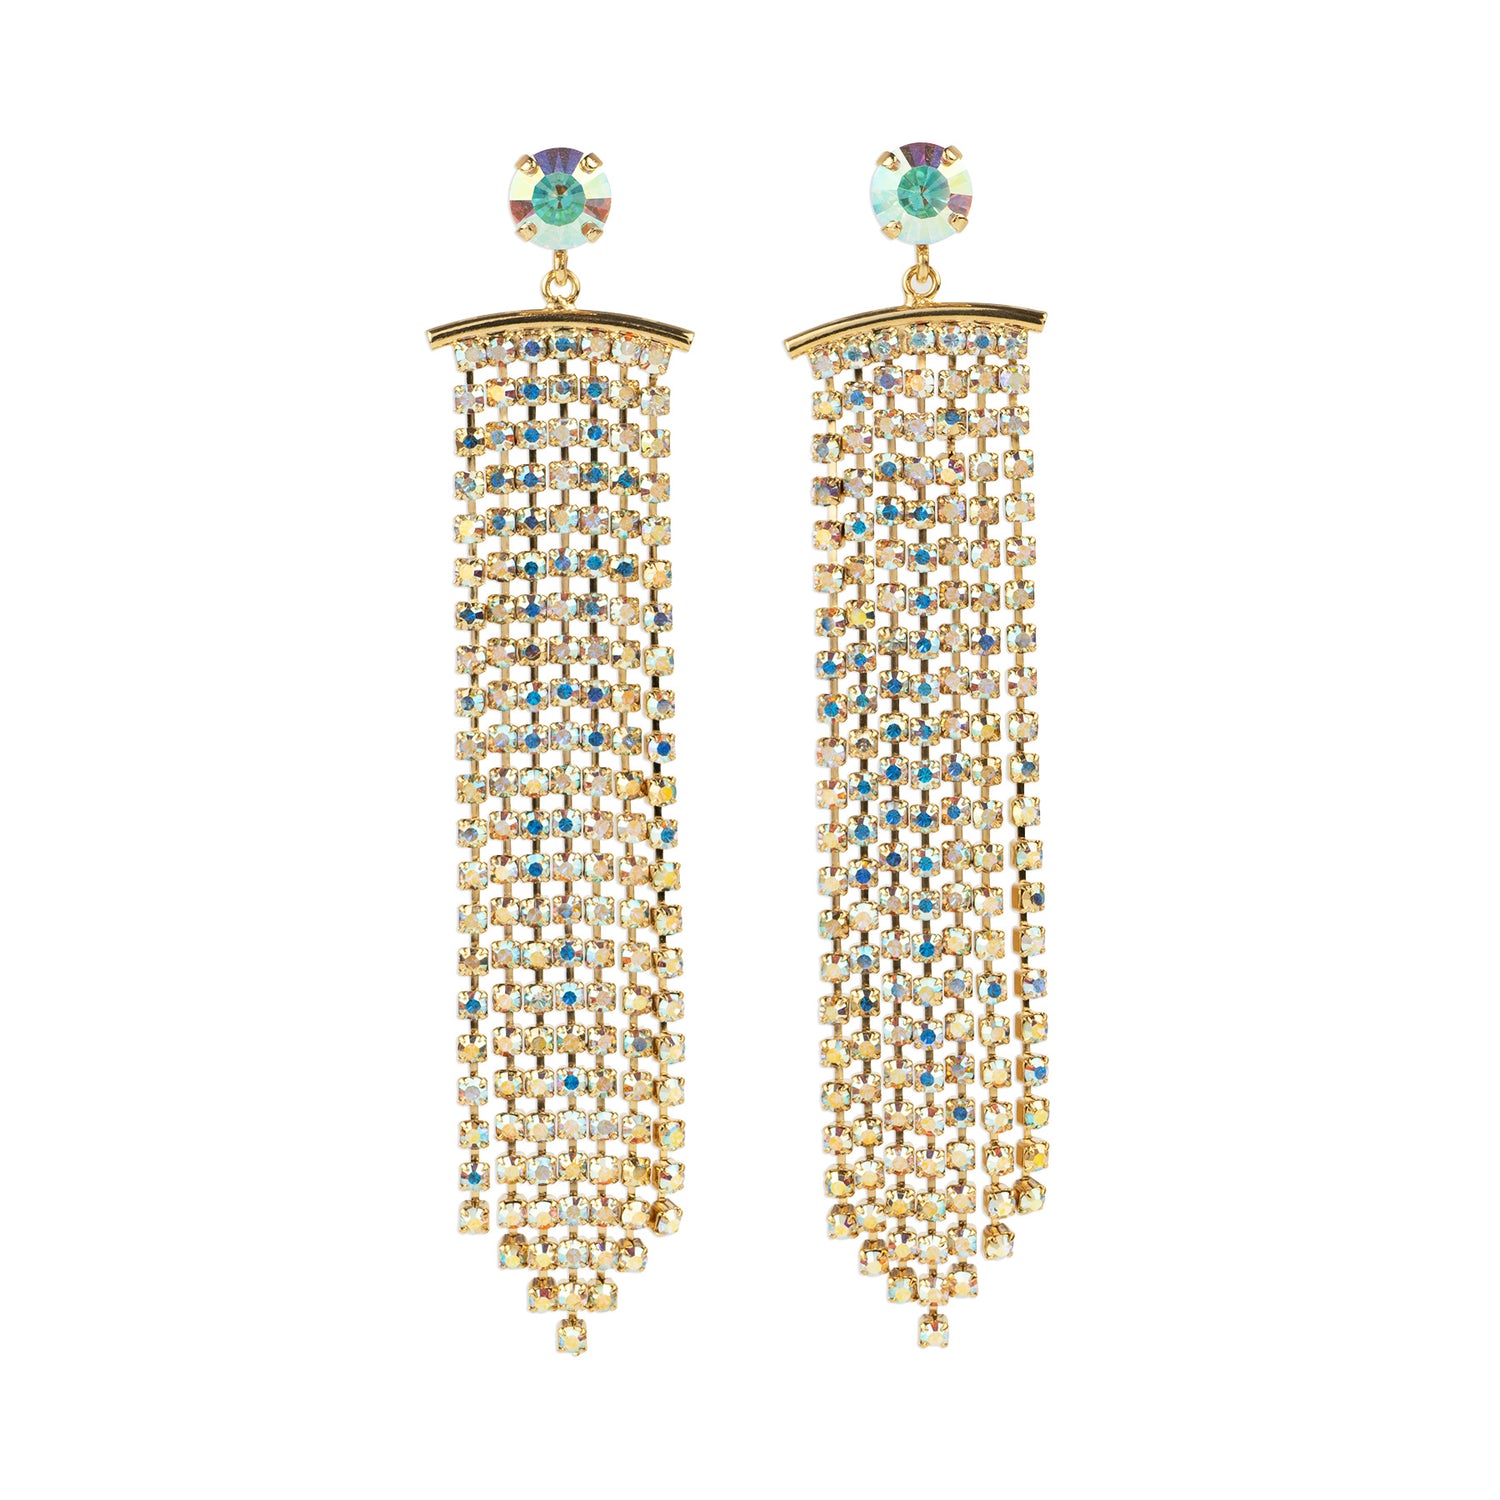 Drop earrings with crystal fringe